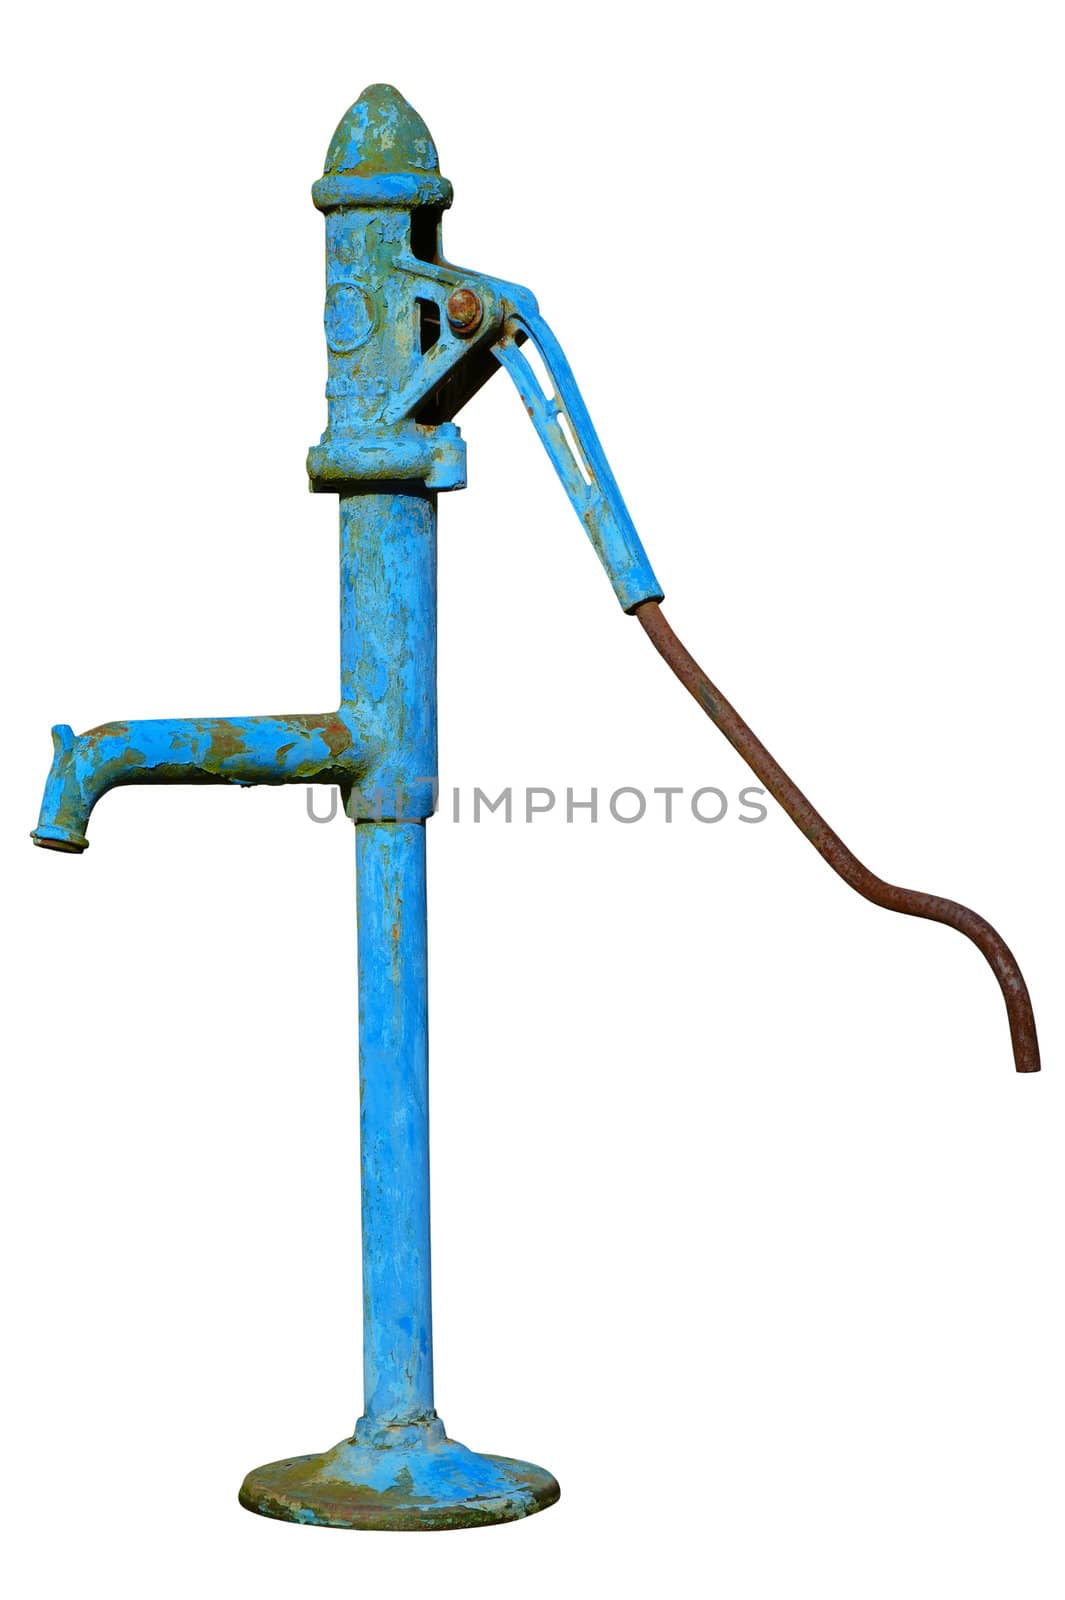 The old fashioned hand water pump isolated on a white background.